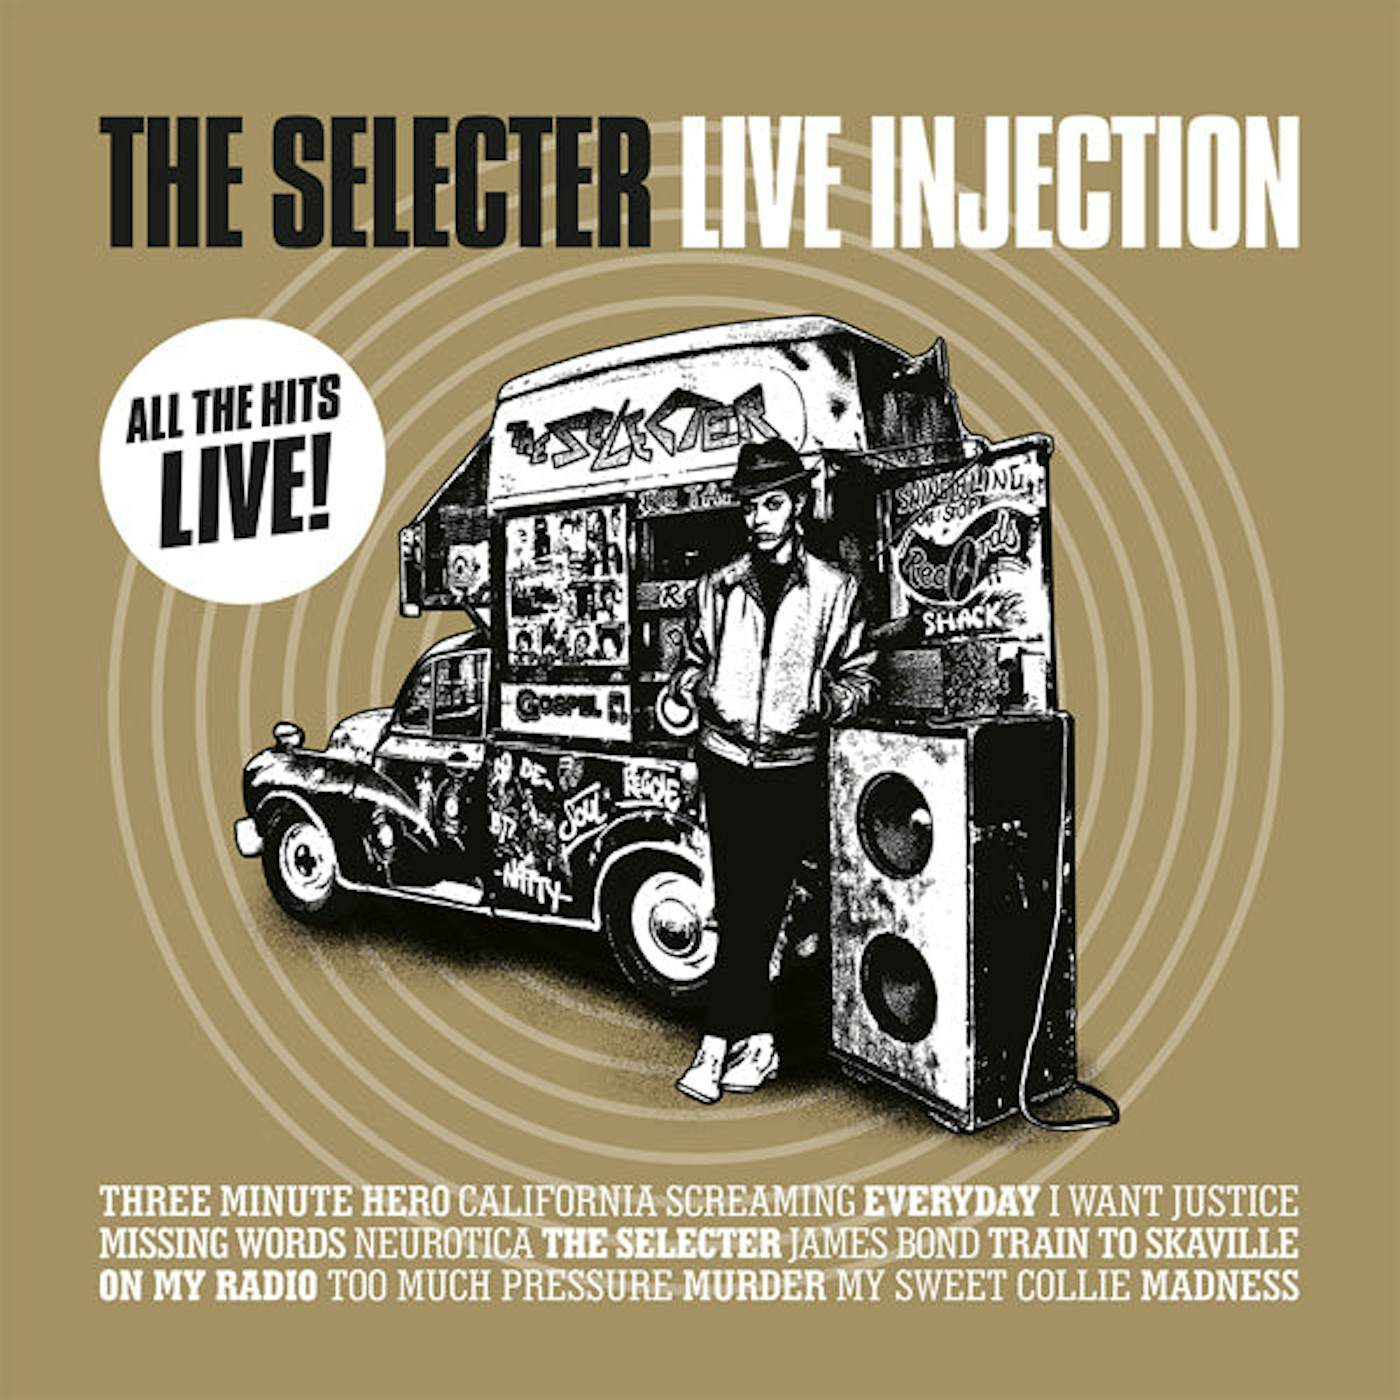 The Selecter LP - Live Injection (White Vinyl)